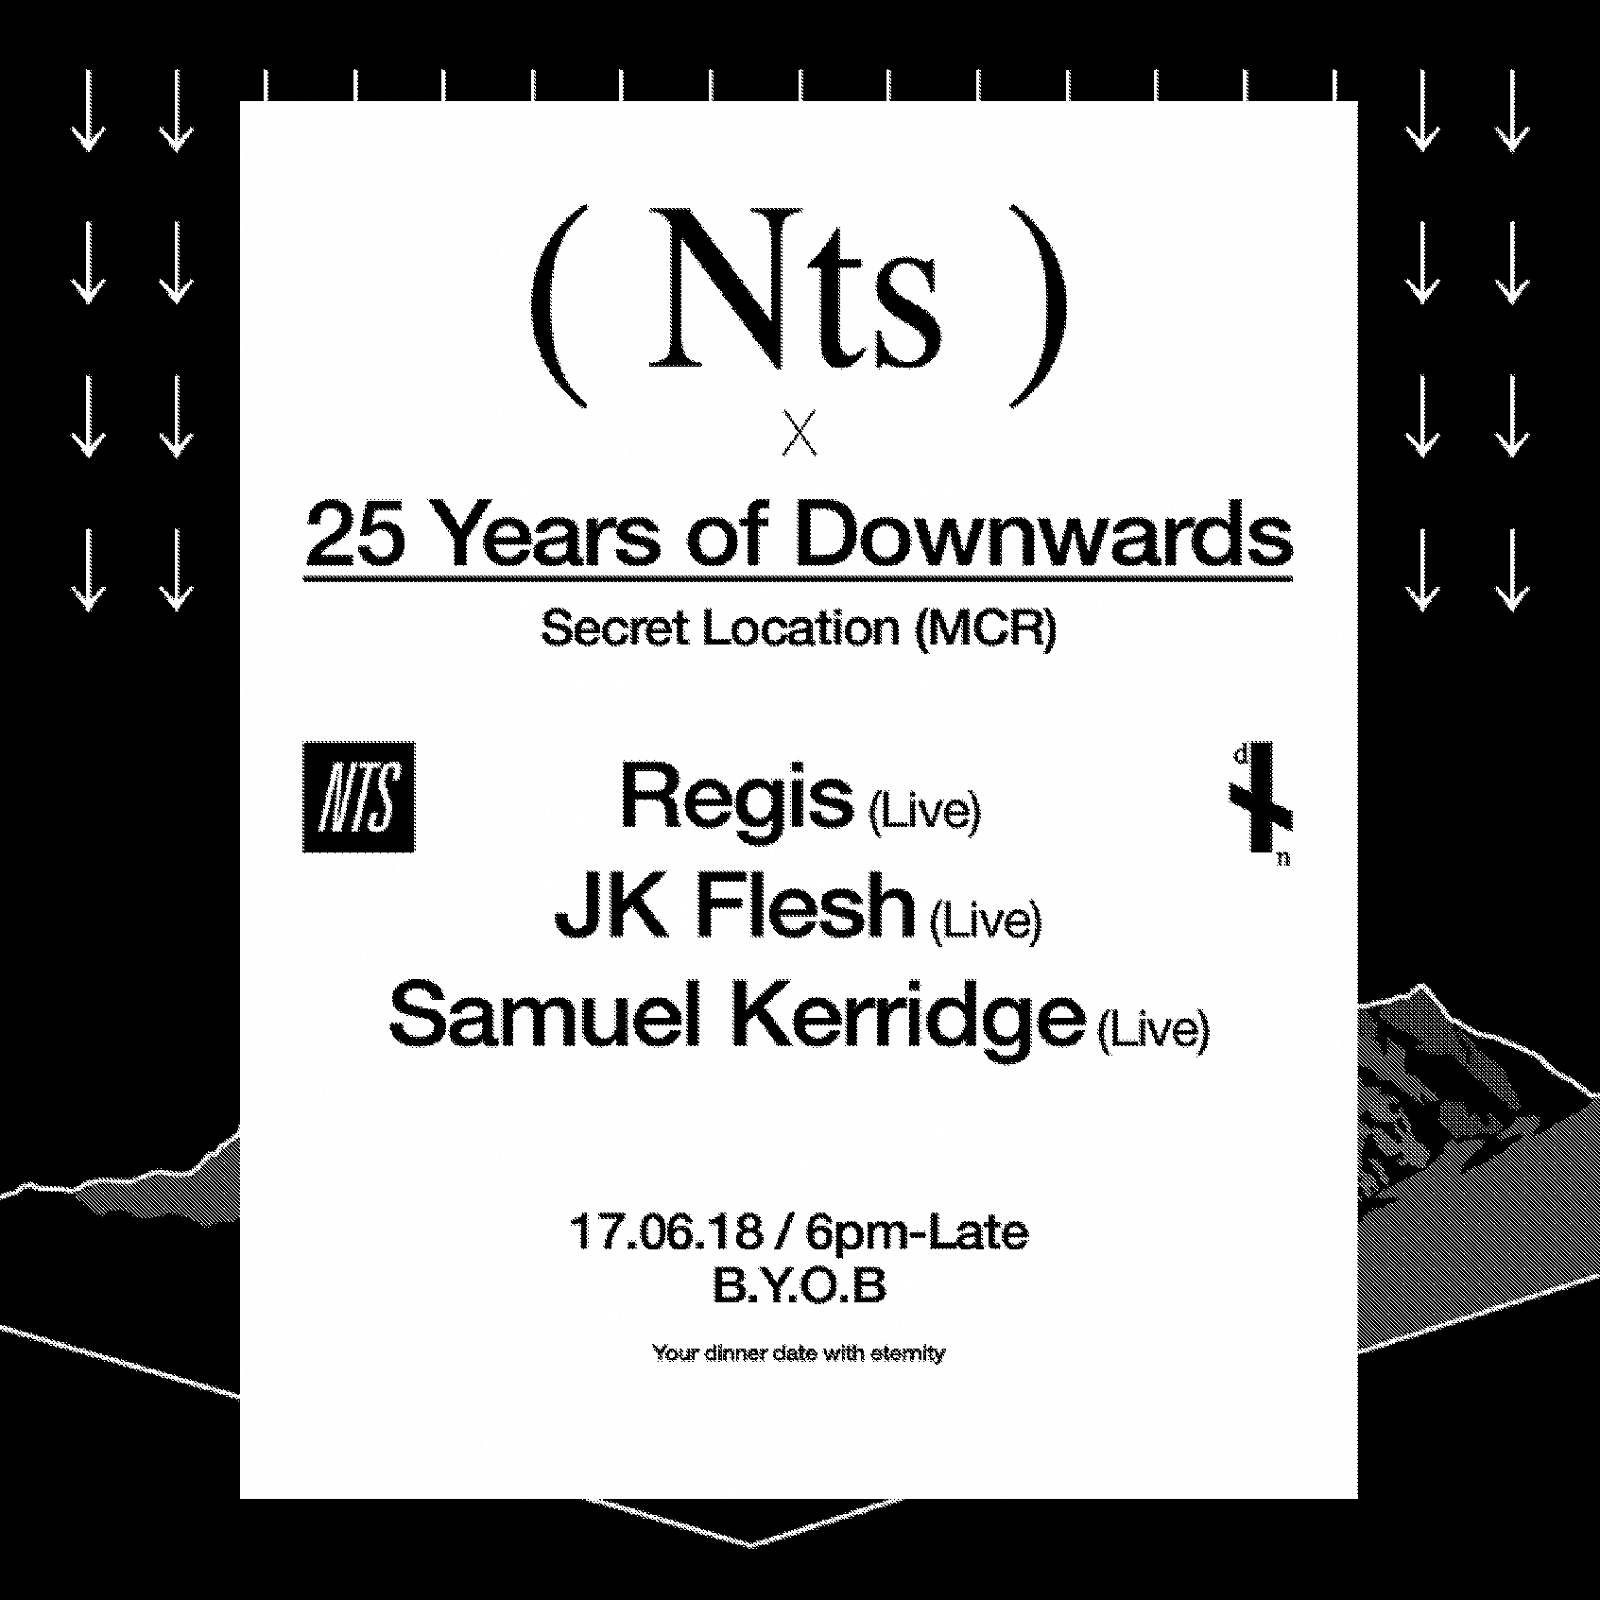 Square_Still-NTS x 25 Years of Downwards Artwork 17.06.18.png